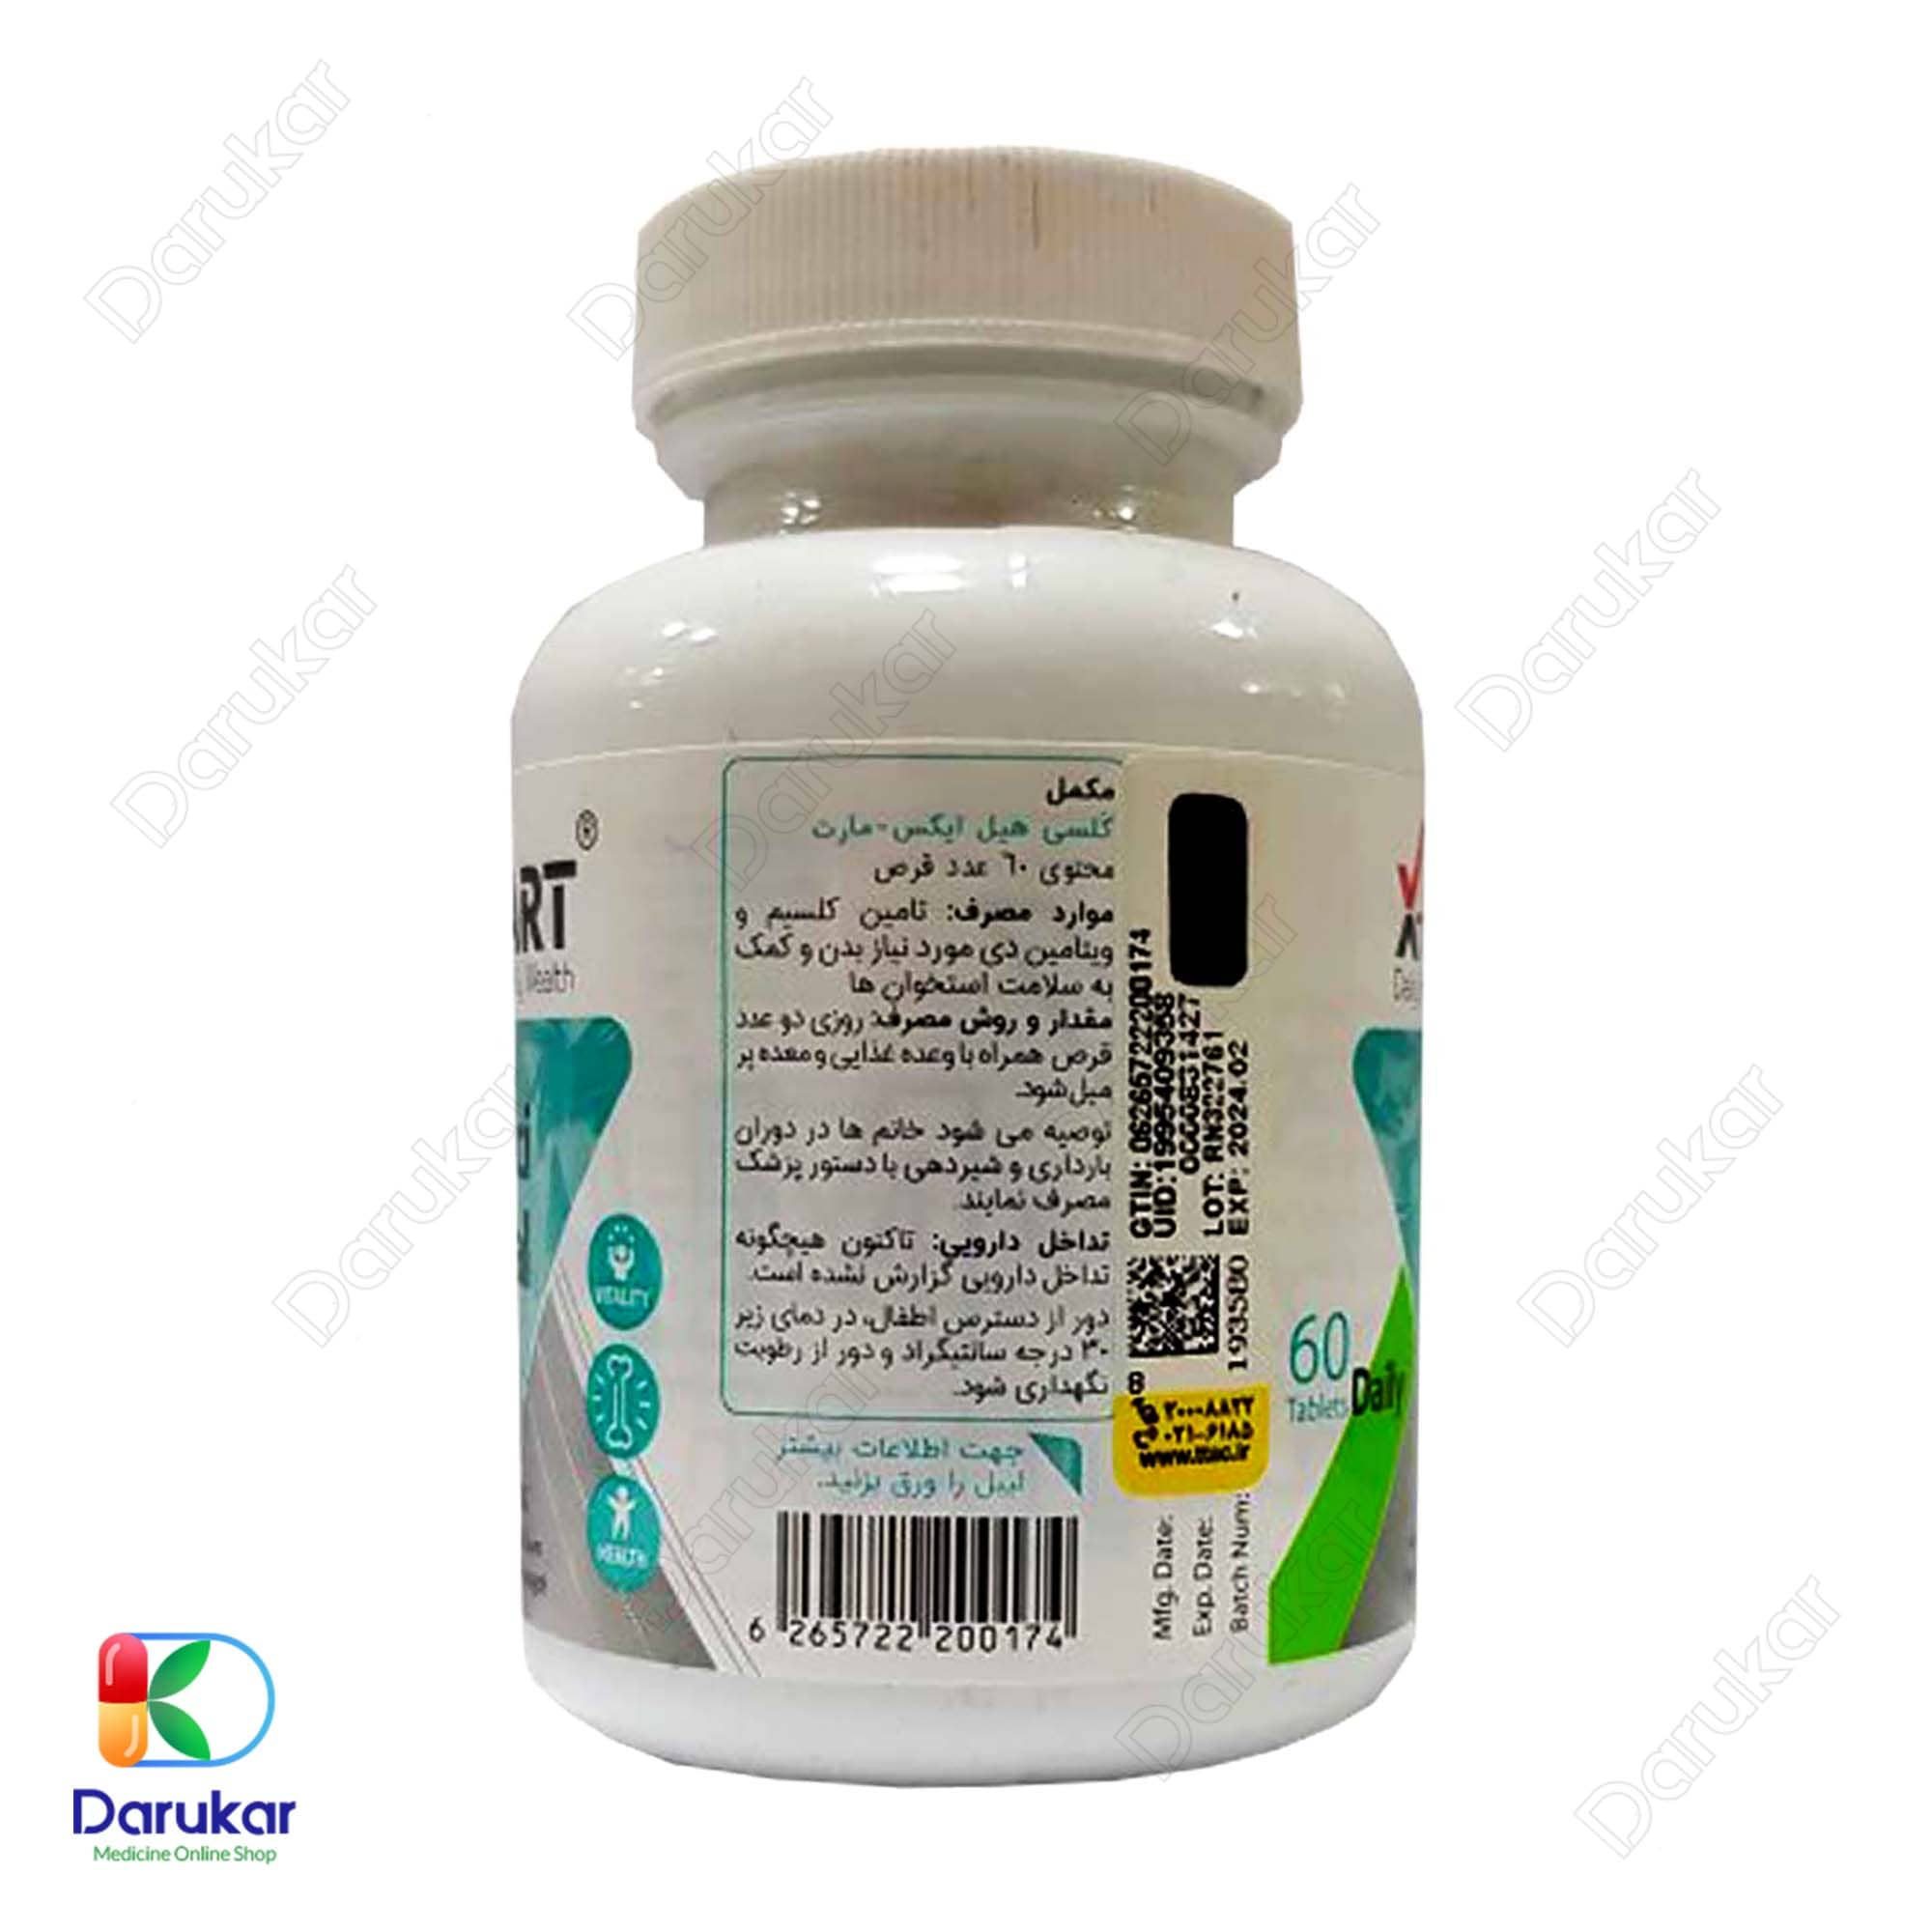 Xmart Calci Heal 60 Tablets Image Gallery